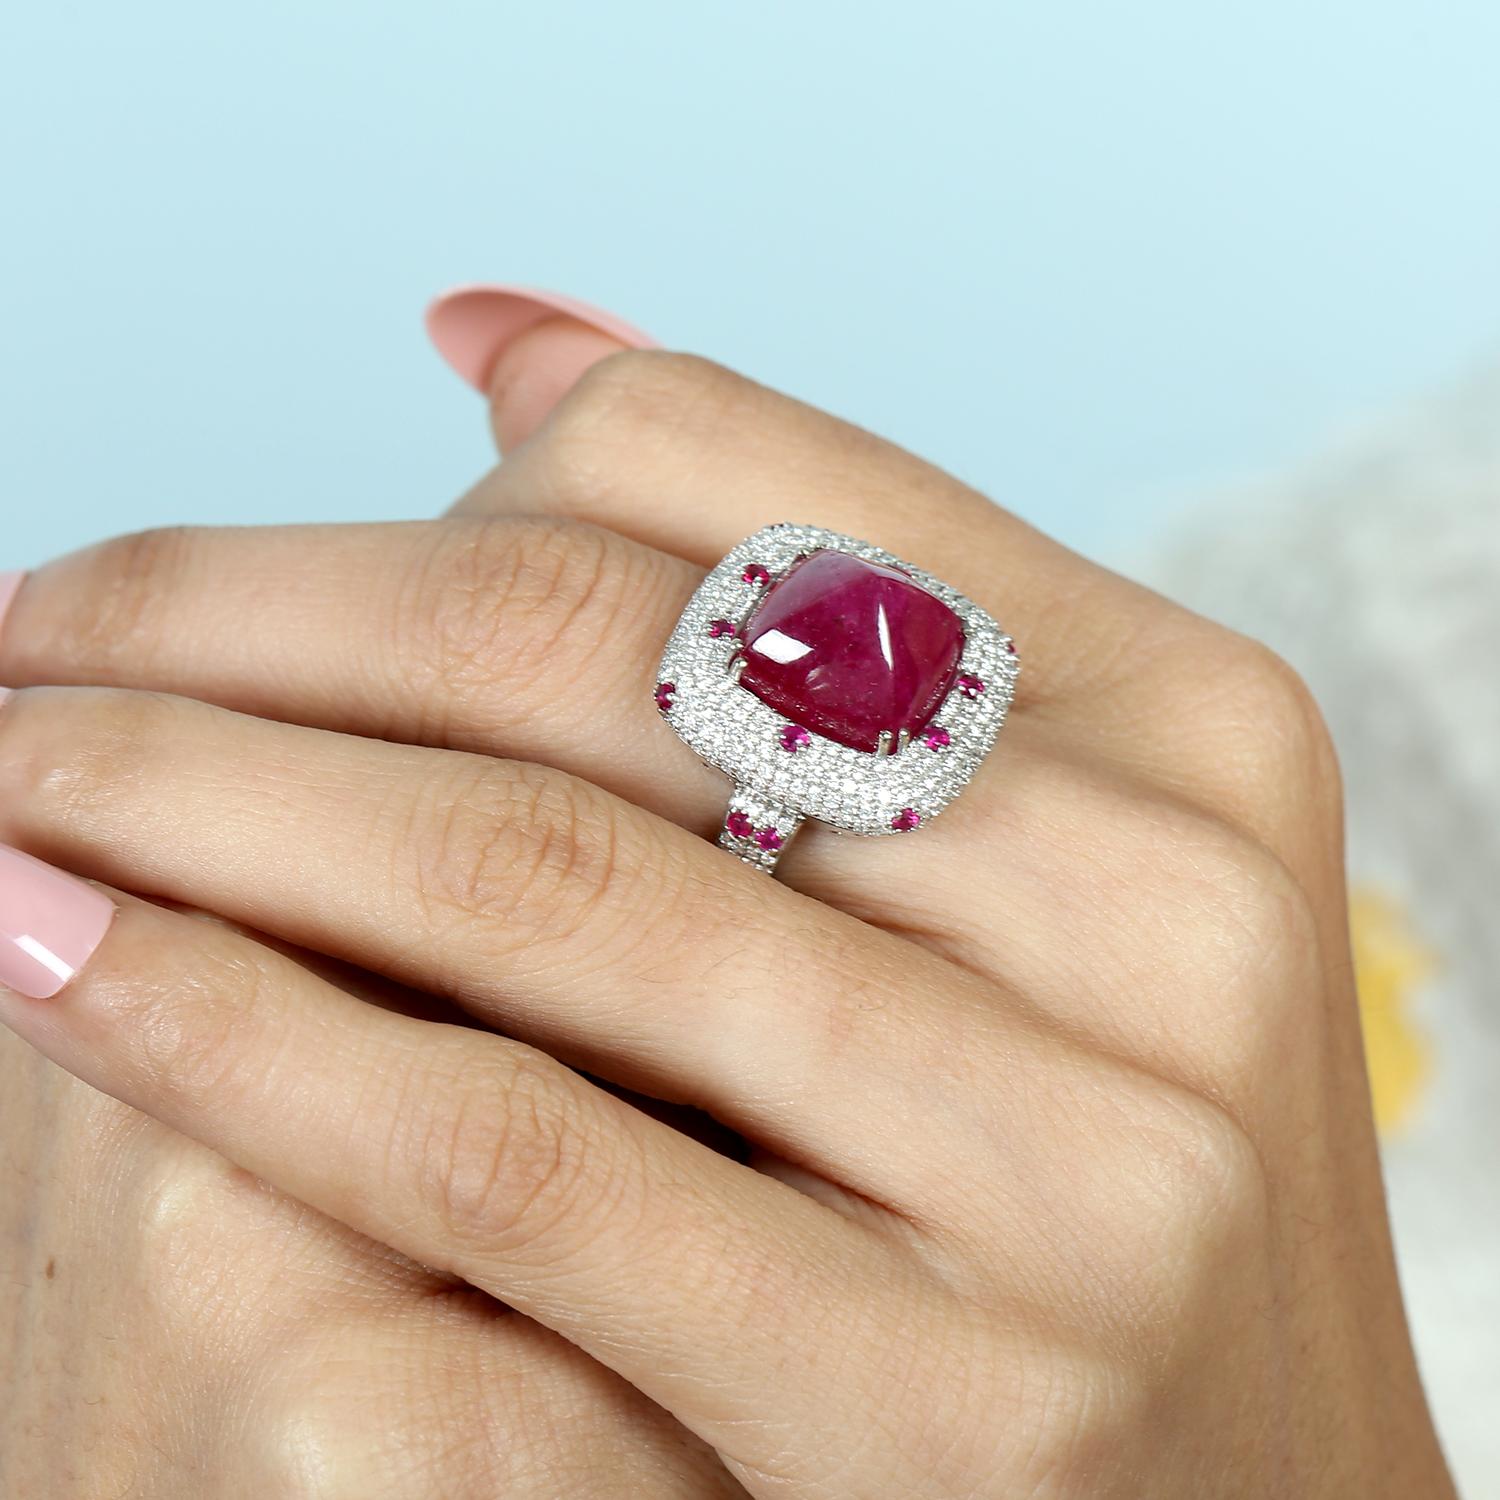 18KT:11.576g,D:1.42ct, Ruby:20.23ct,